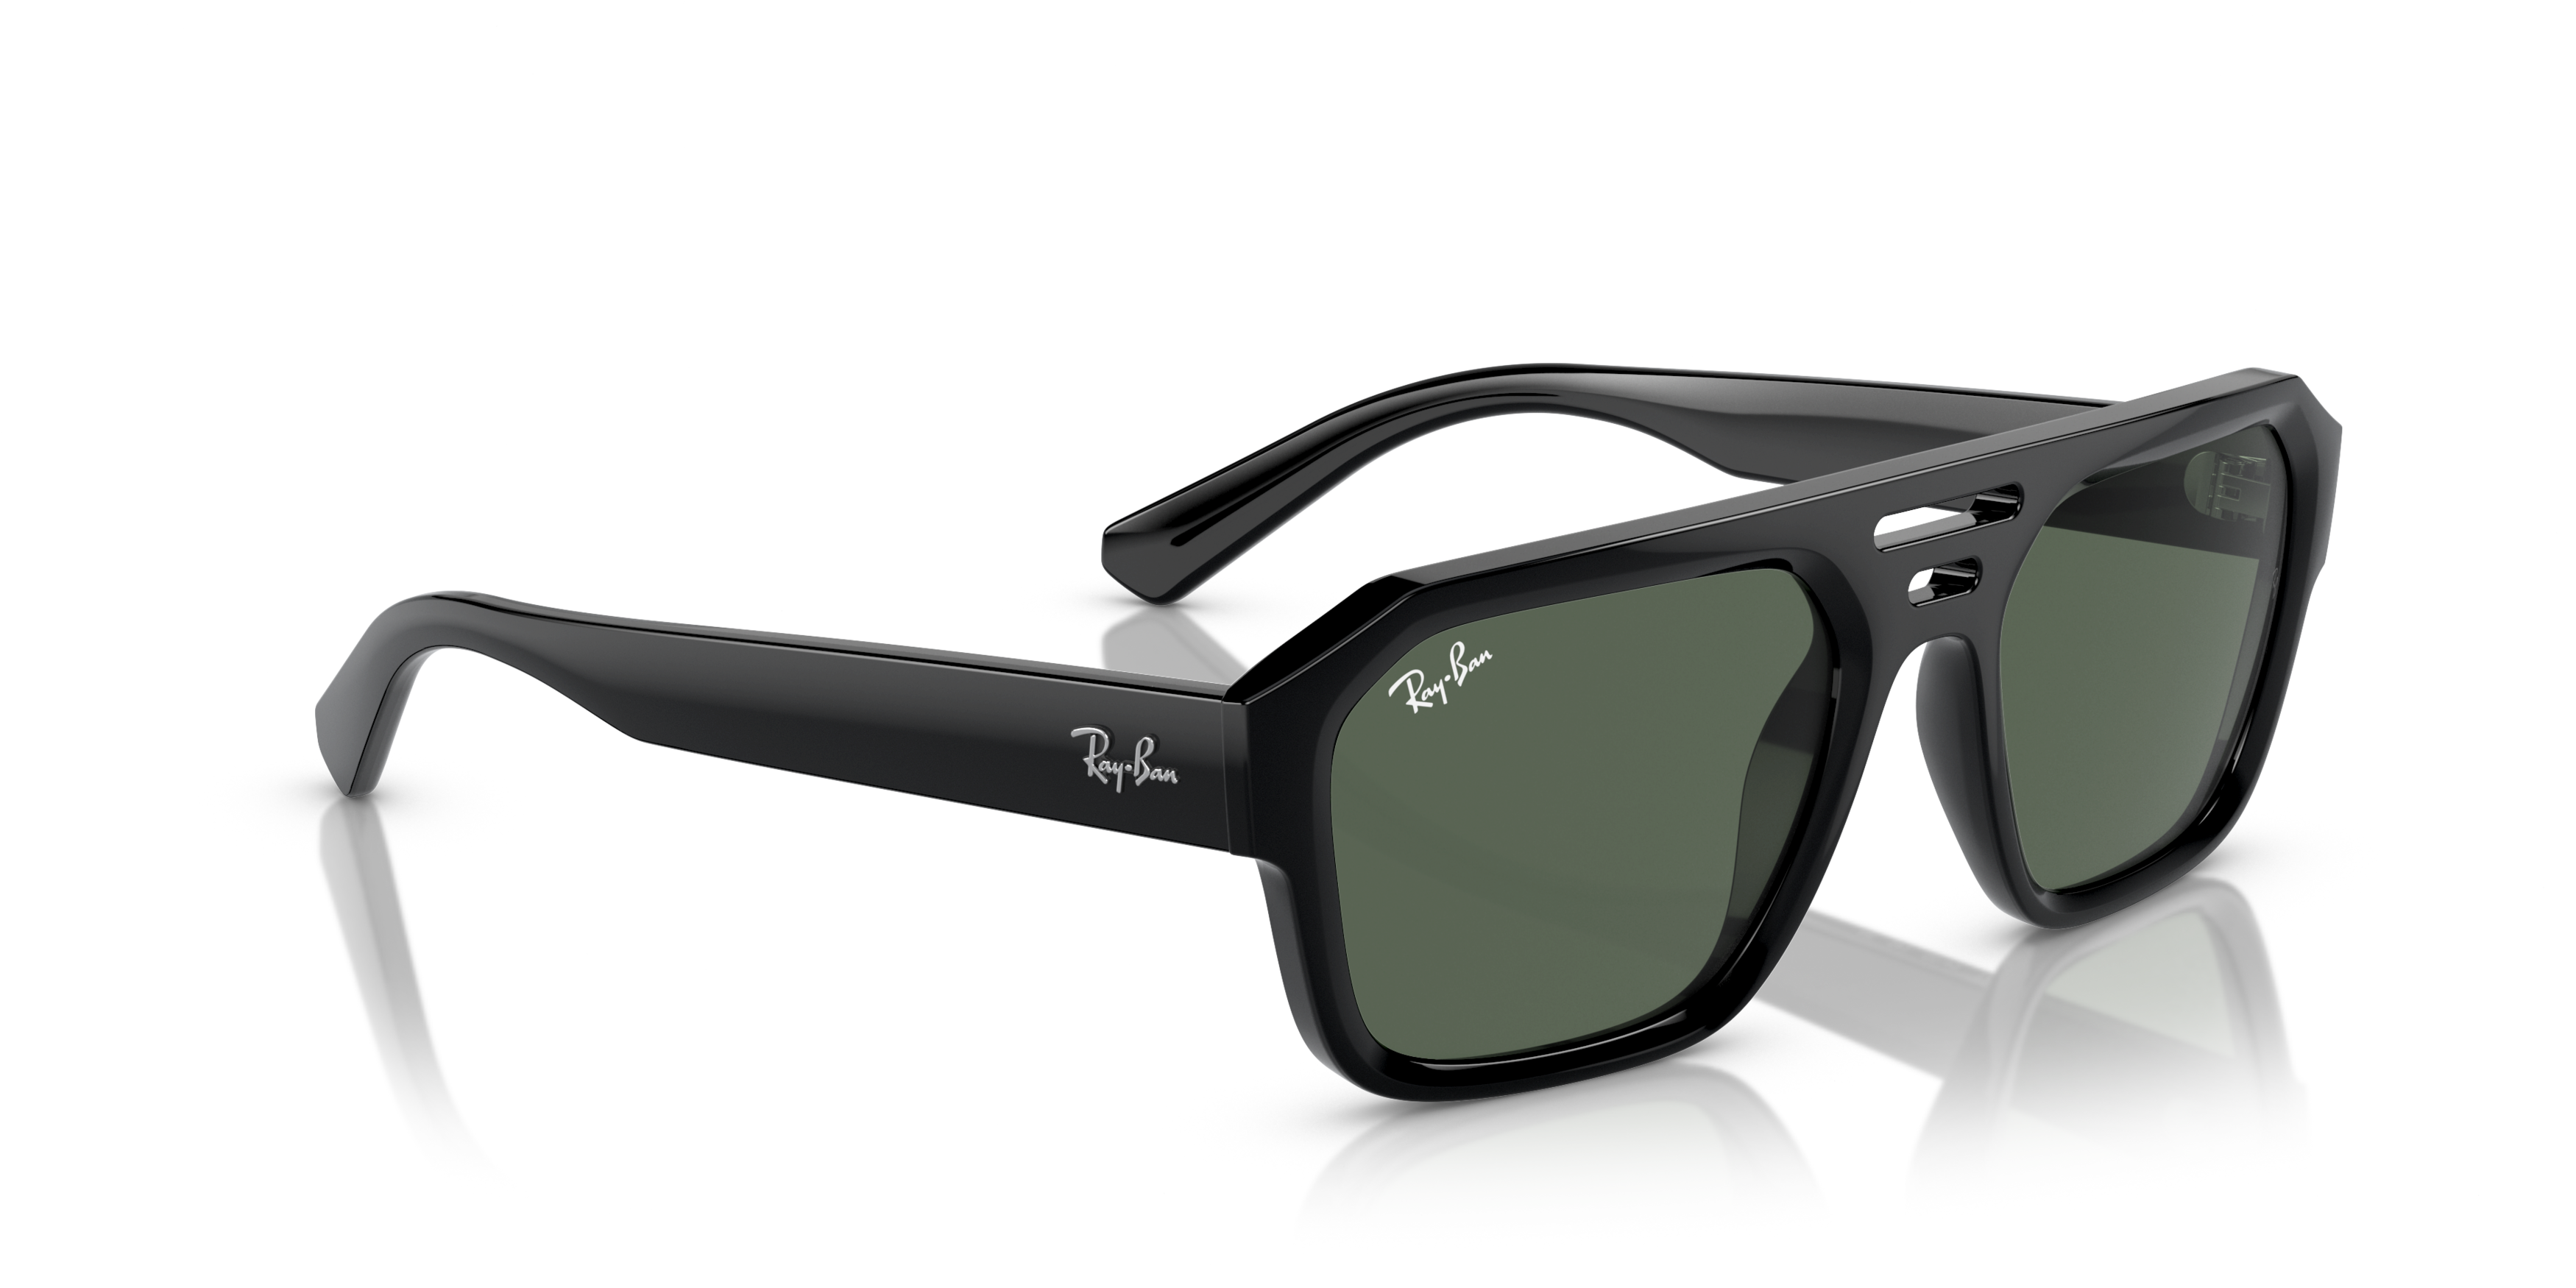 Angle_Right01 Ray-Ban 0RB4397 667771 Verde / Negro